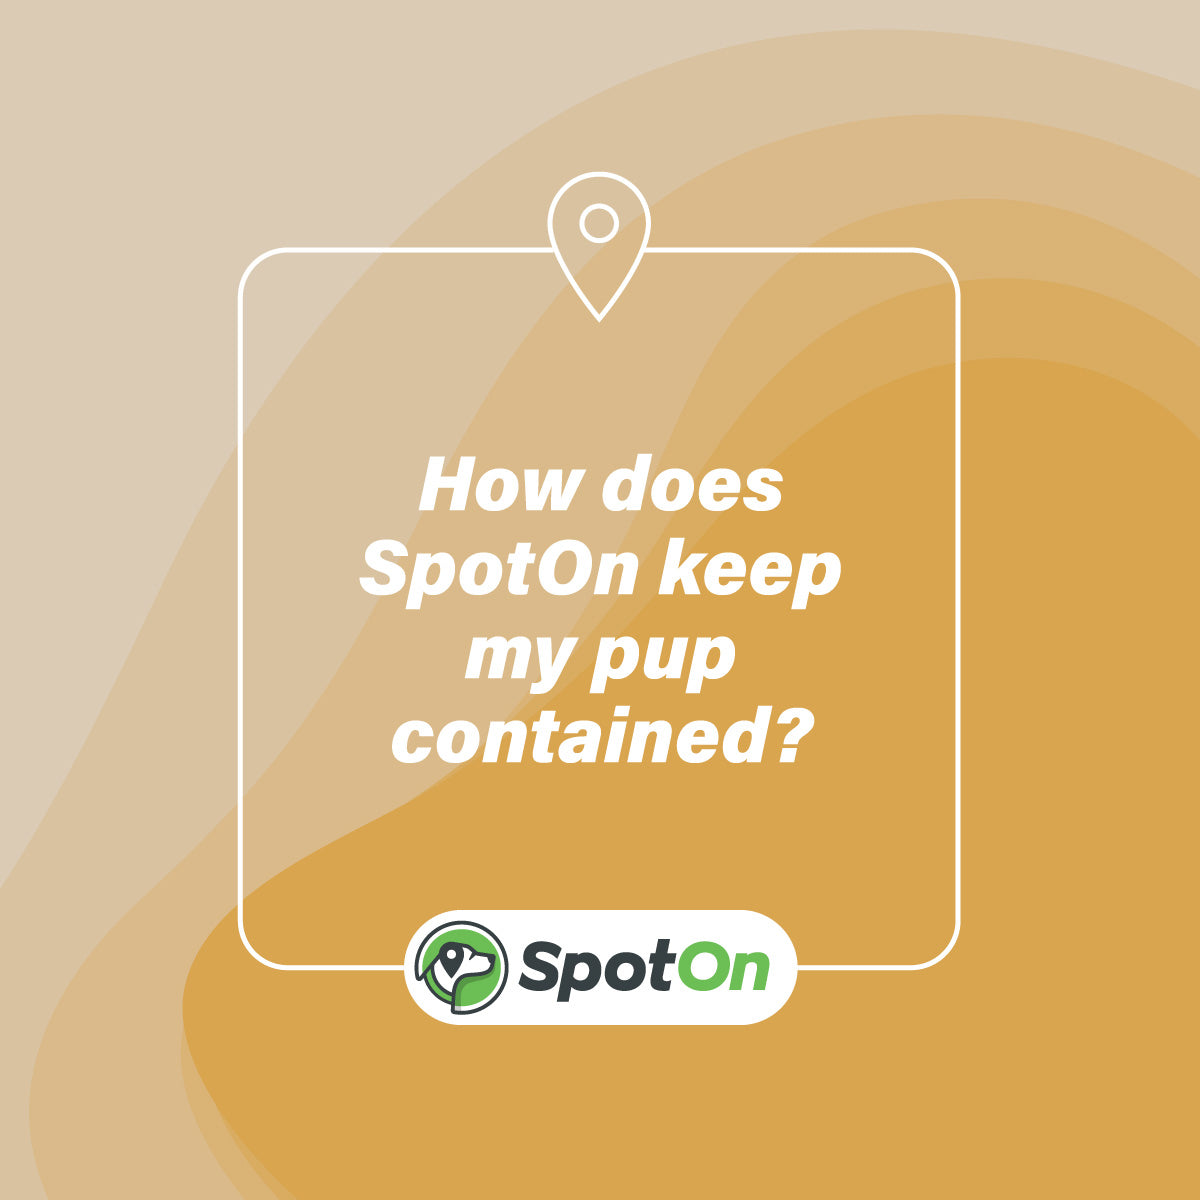 How does SpotOn keep my pup contained?